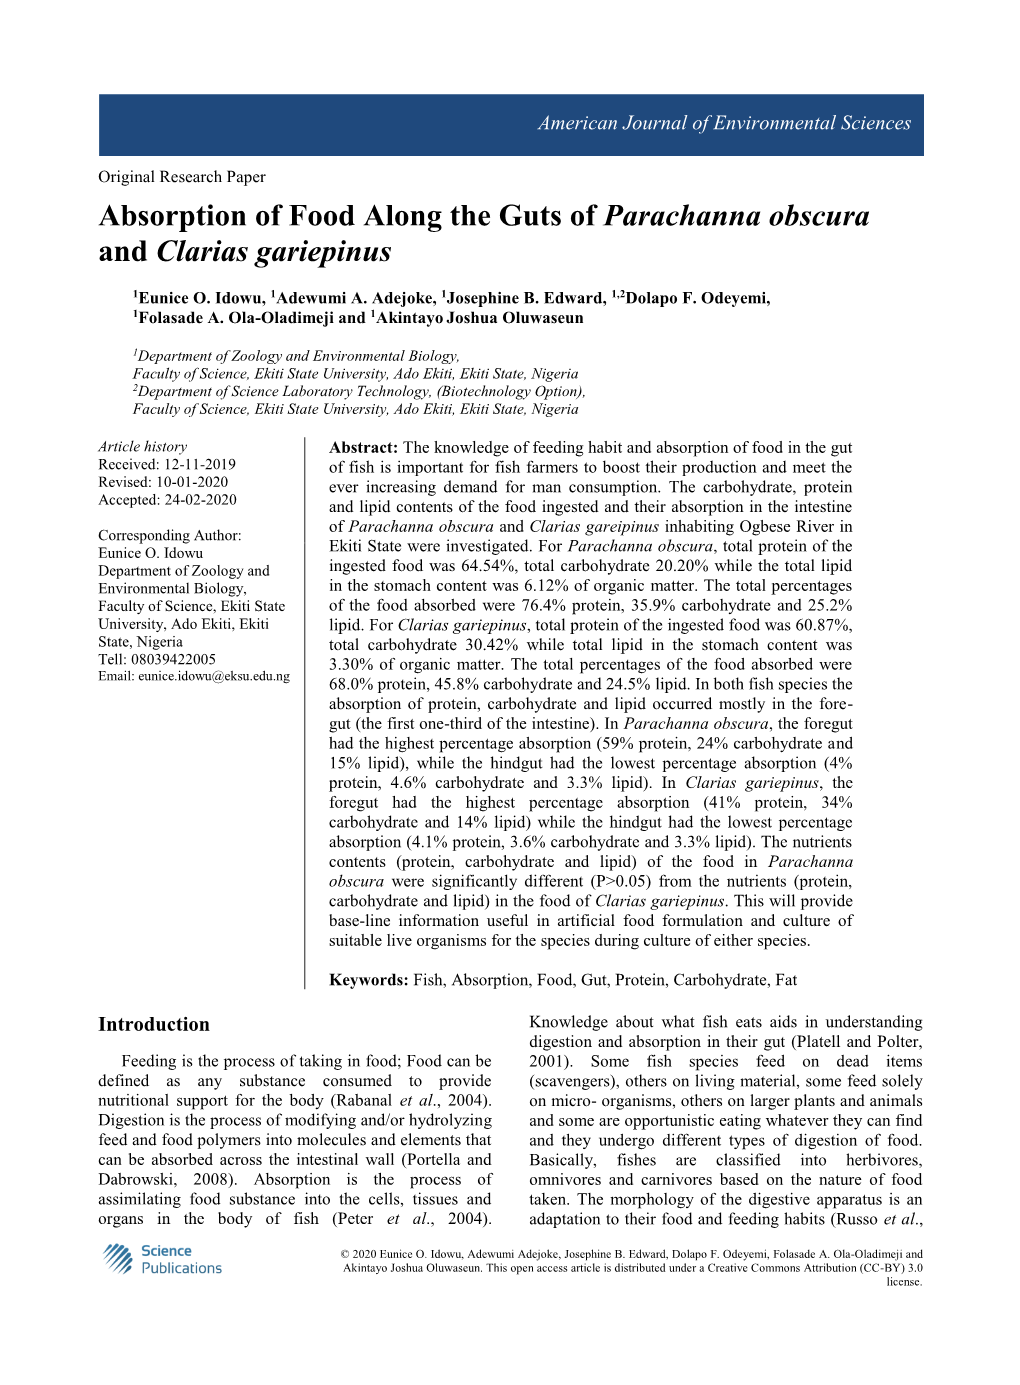 Absorption of Food Along the Guts of Parachanna Obscura and Clarias Gariepinus